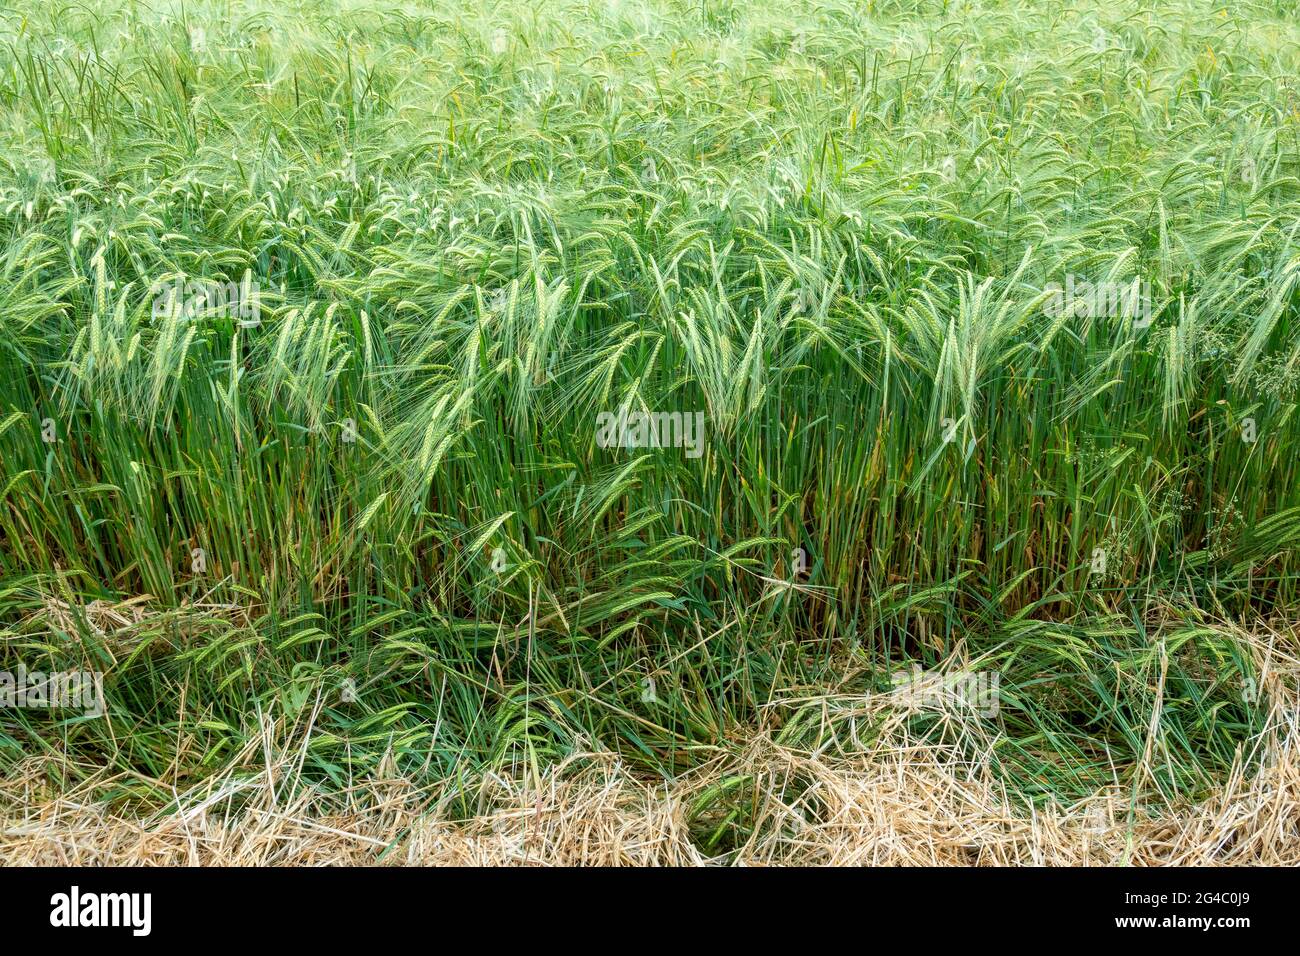 Detail area of a young green two row barley crop in a field Stock Photo